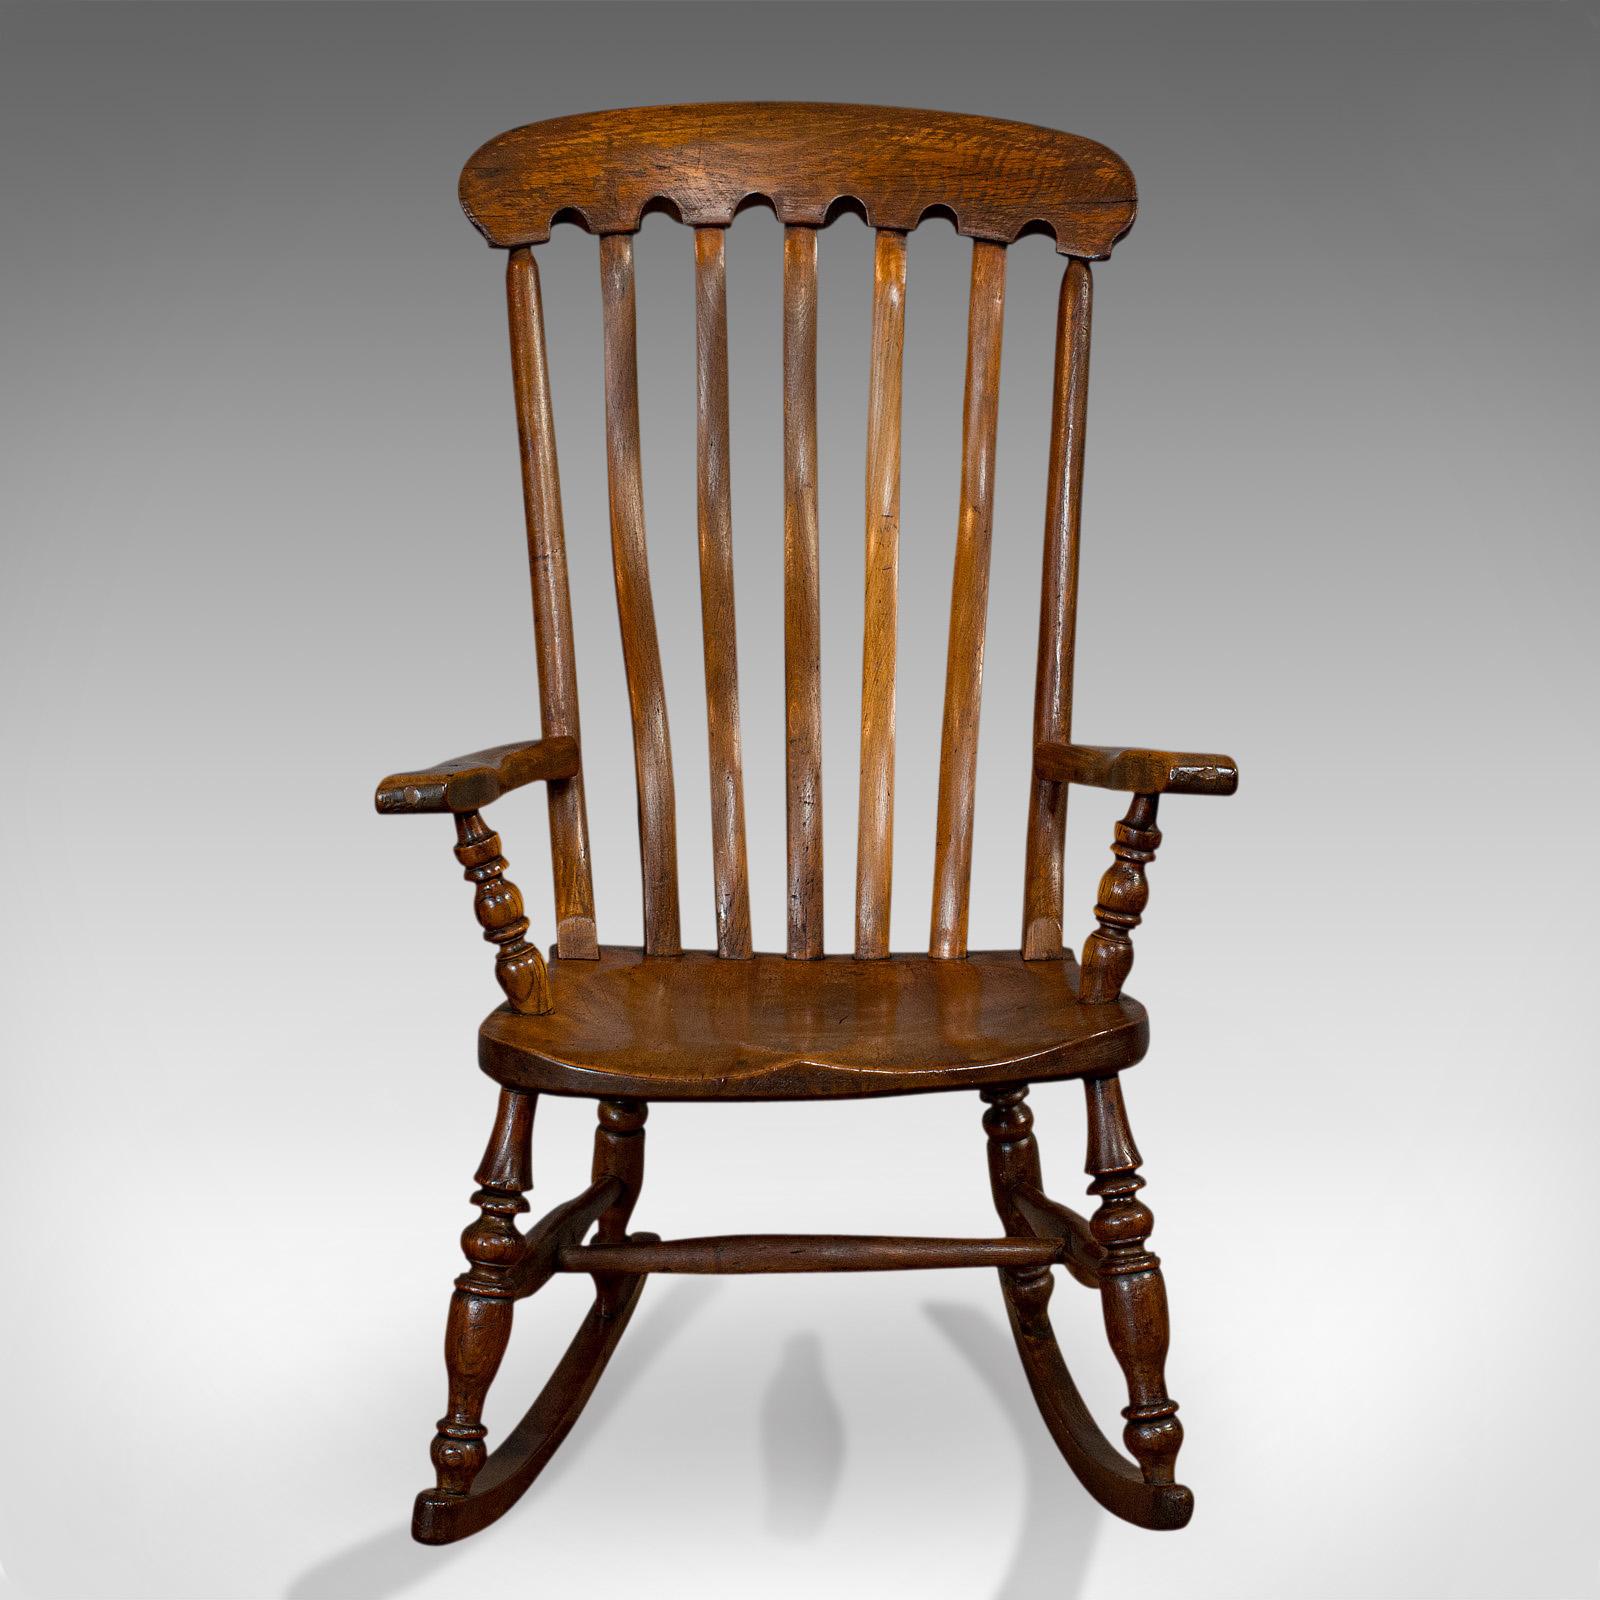 This is an antique farmhouse rocking chair. An English, elm and beech seat, dating to the Victorian period, circa 1900.

Superb rural craftsmanship
Displays a desirable aged patina
Select elm and beech shows fine grain interest
Attractive dark